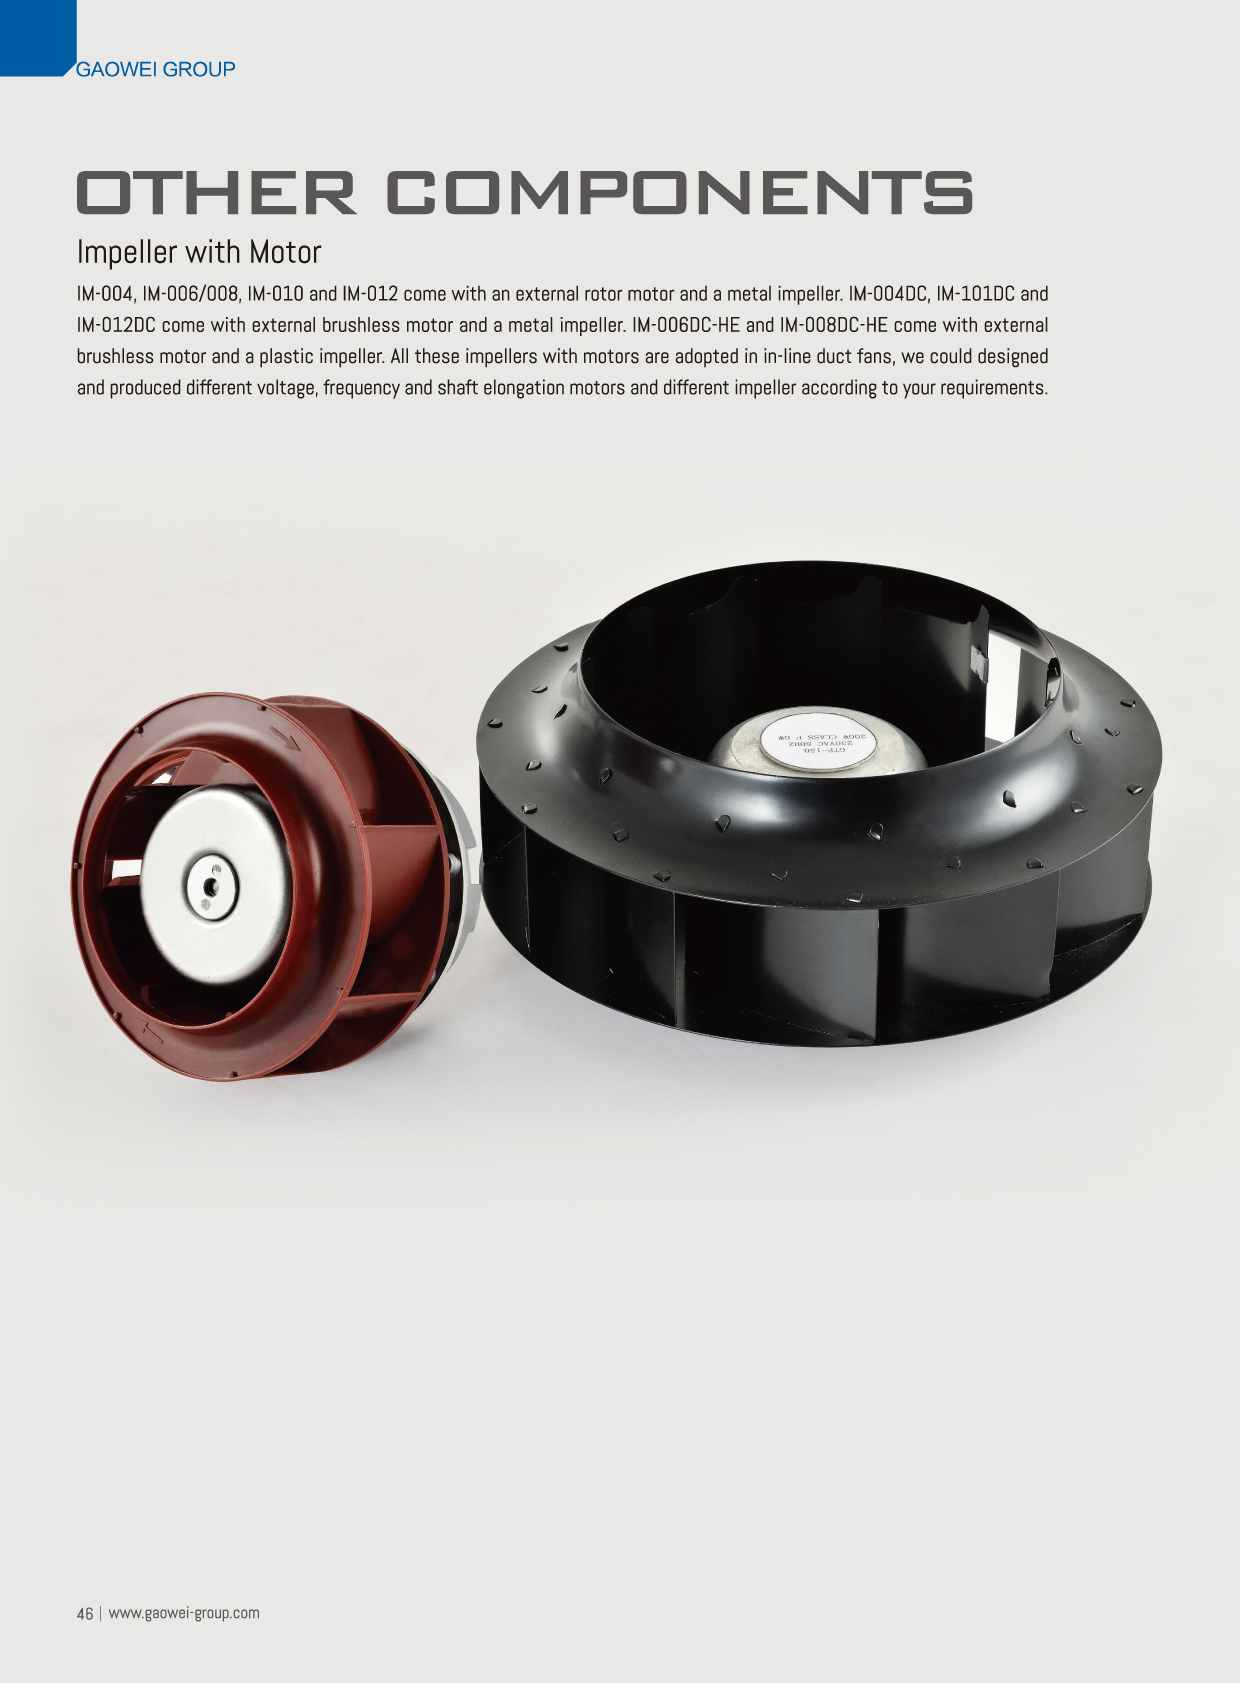 Impeller with Motor